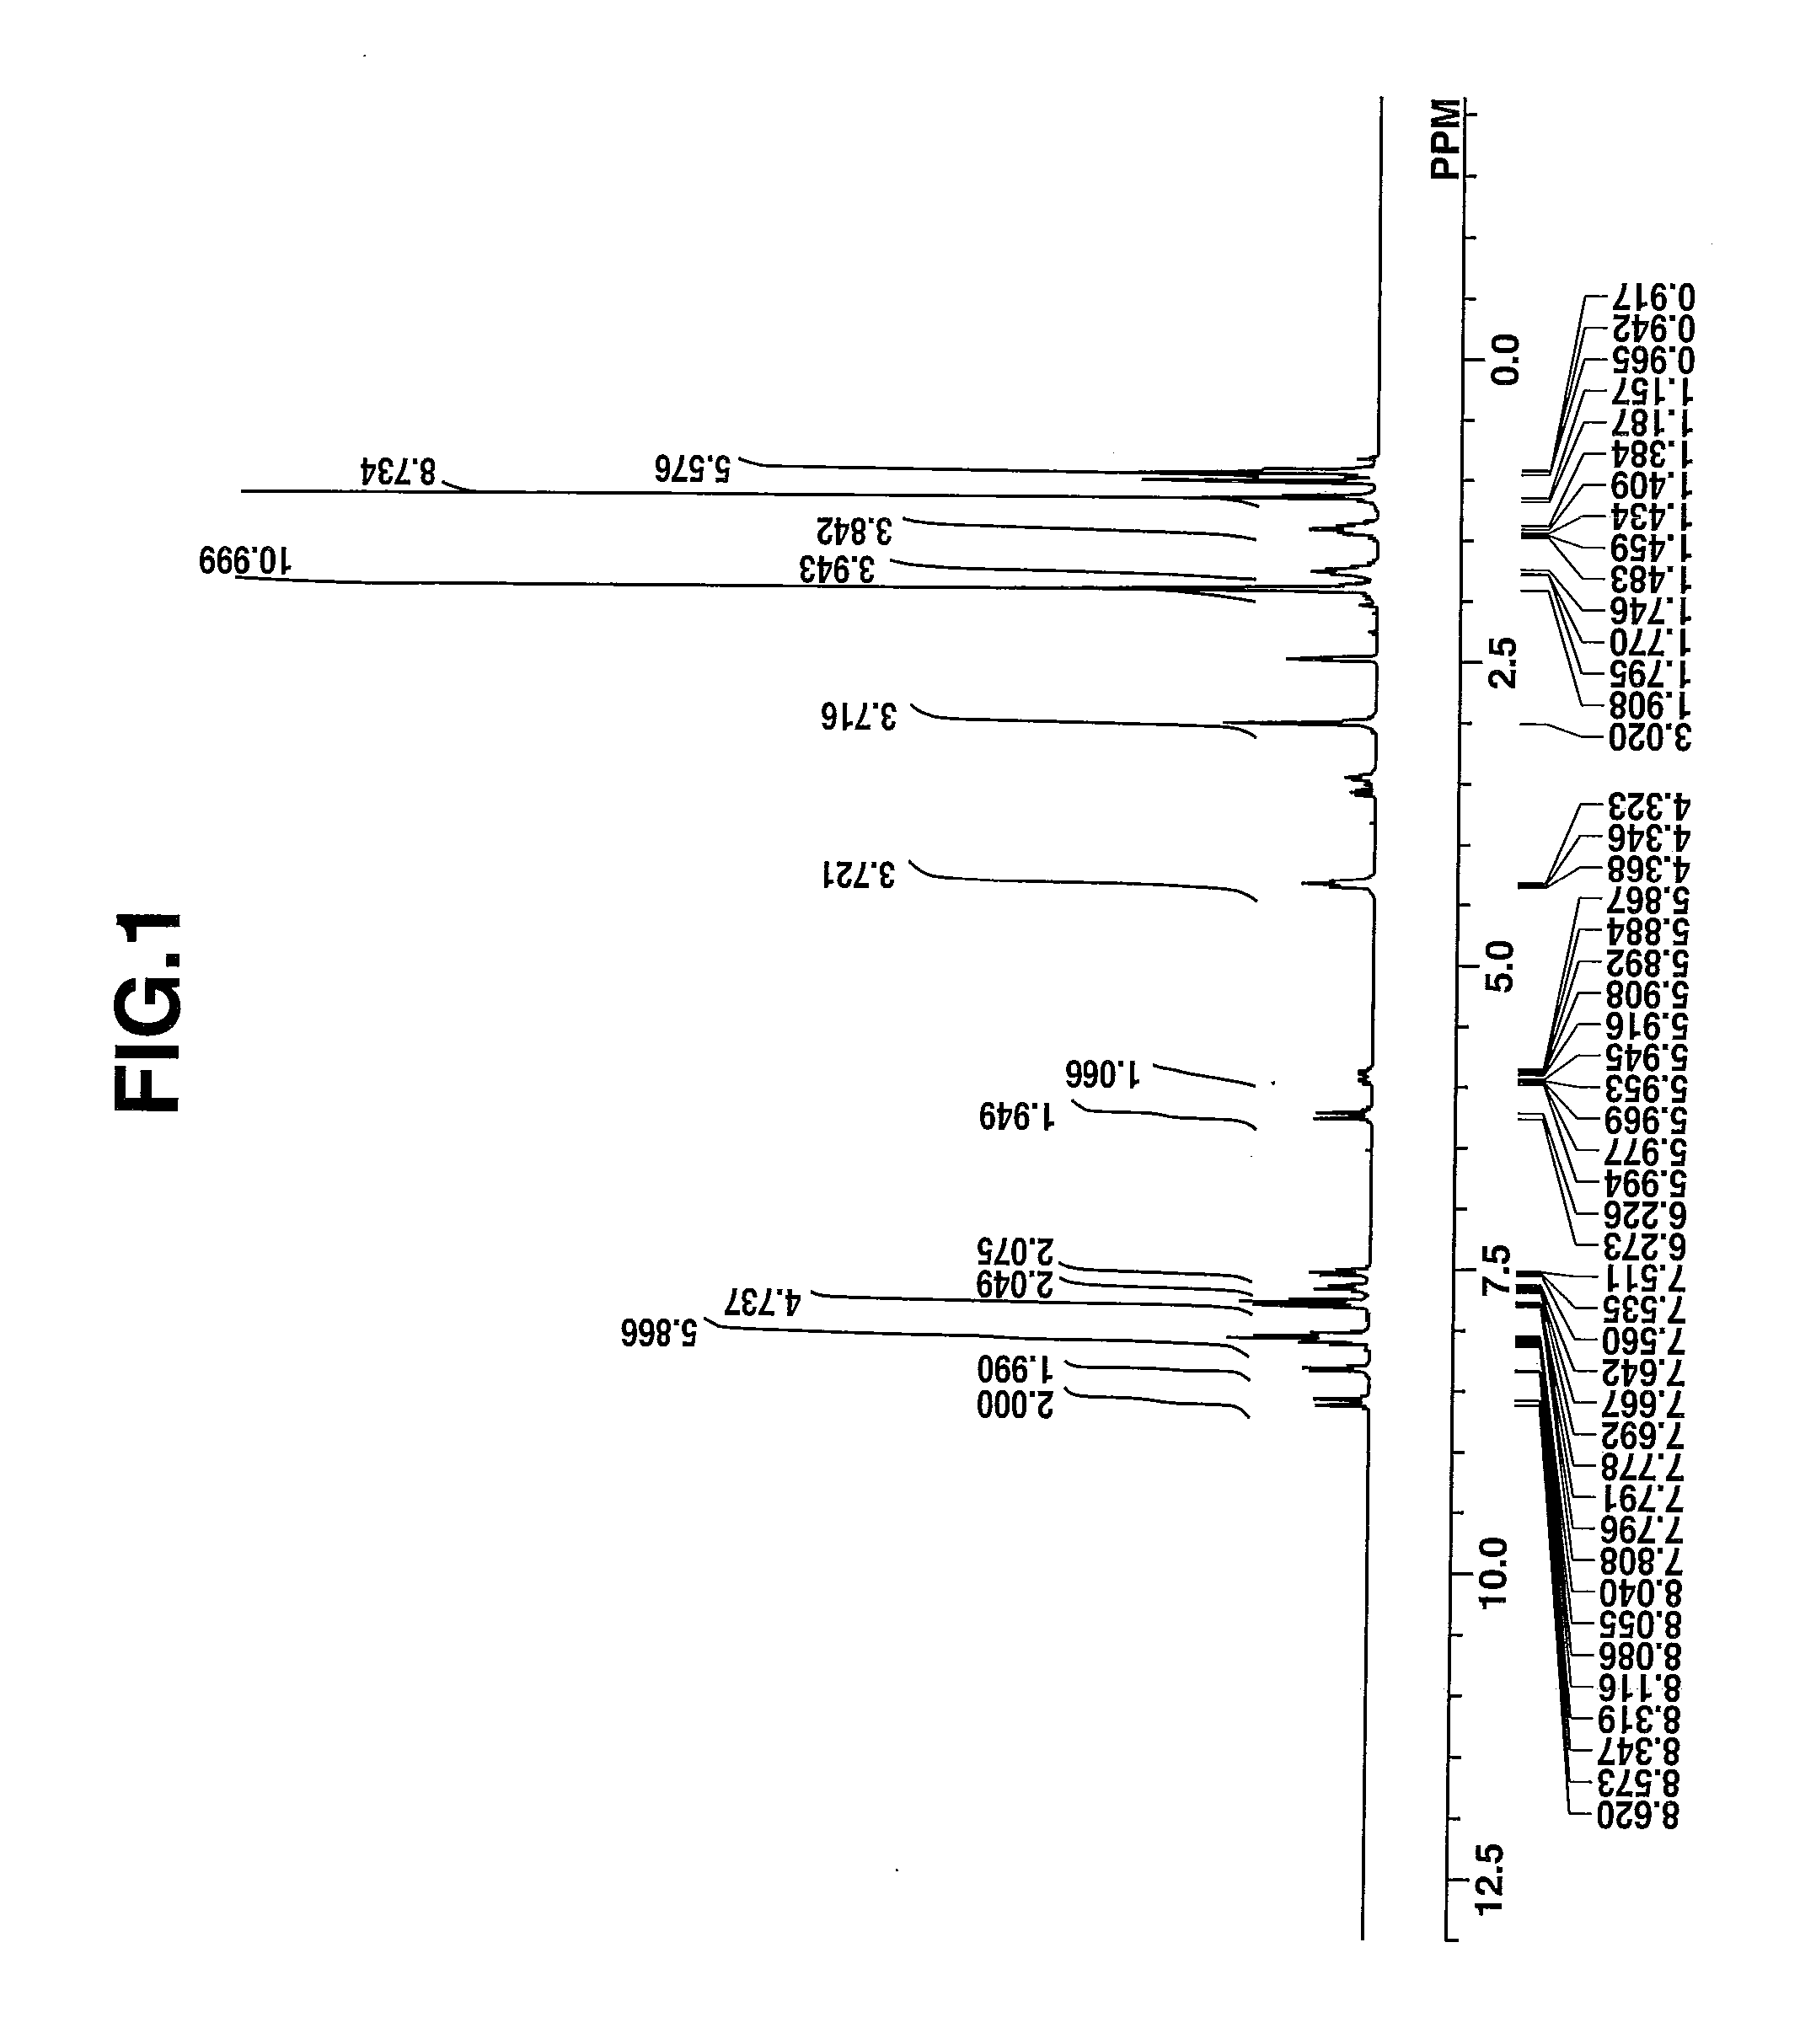 Near-infrared absorbing dye, near-infrared absorptive film-forming composition, and near-infrared absorptive film